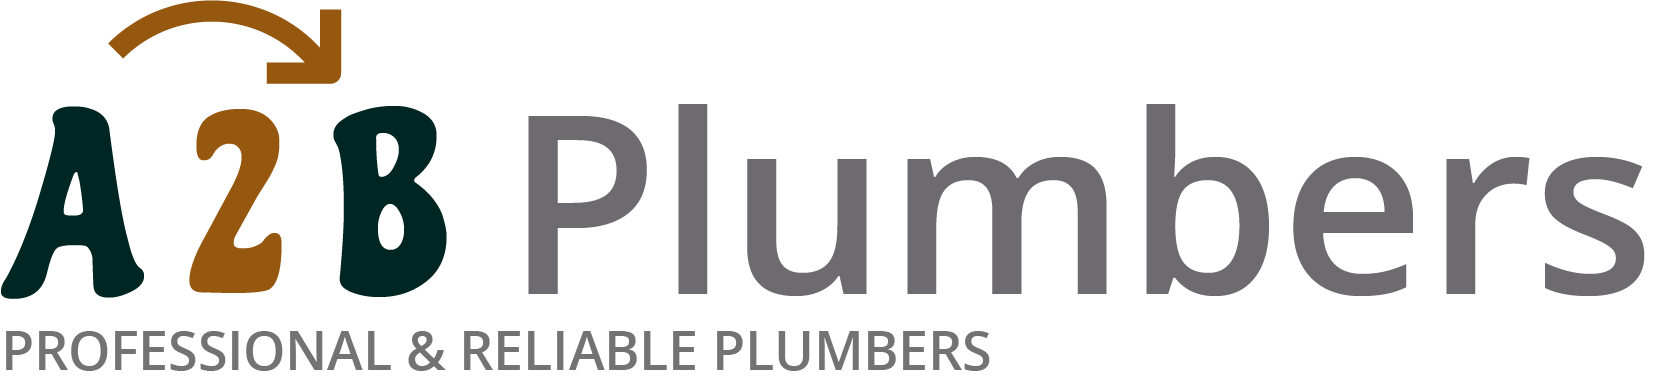 If you need a boiler installed, a radiator repaired or a leaking tap fixed, call us now - we provide services for properties in Pinxton and the local area.